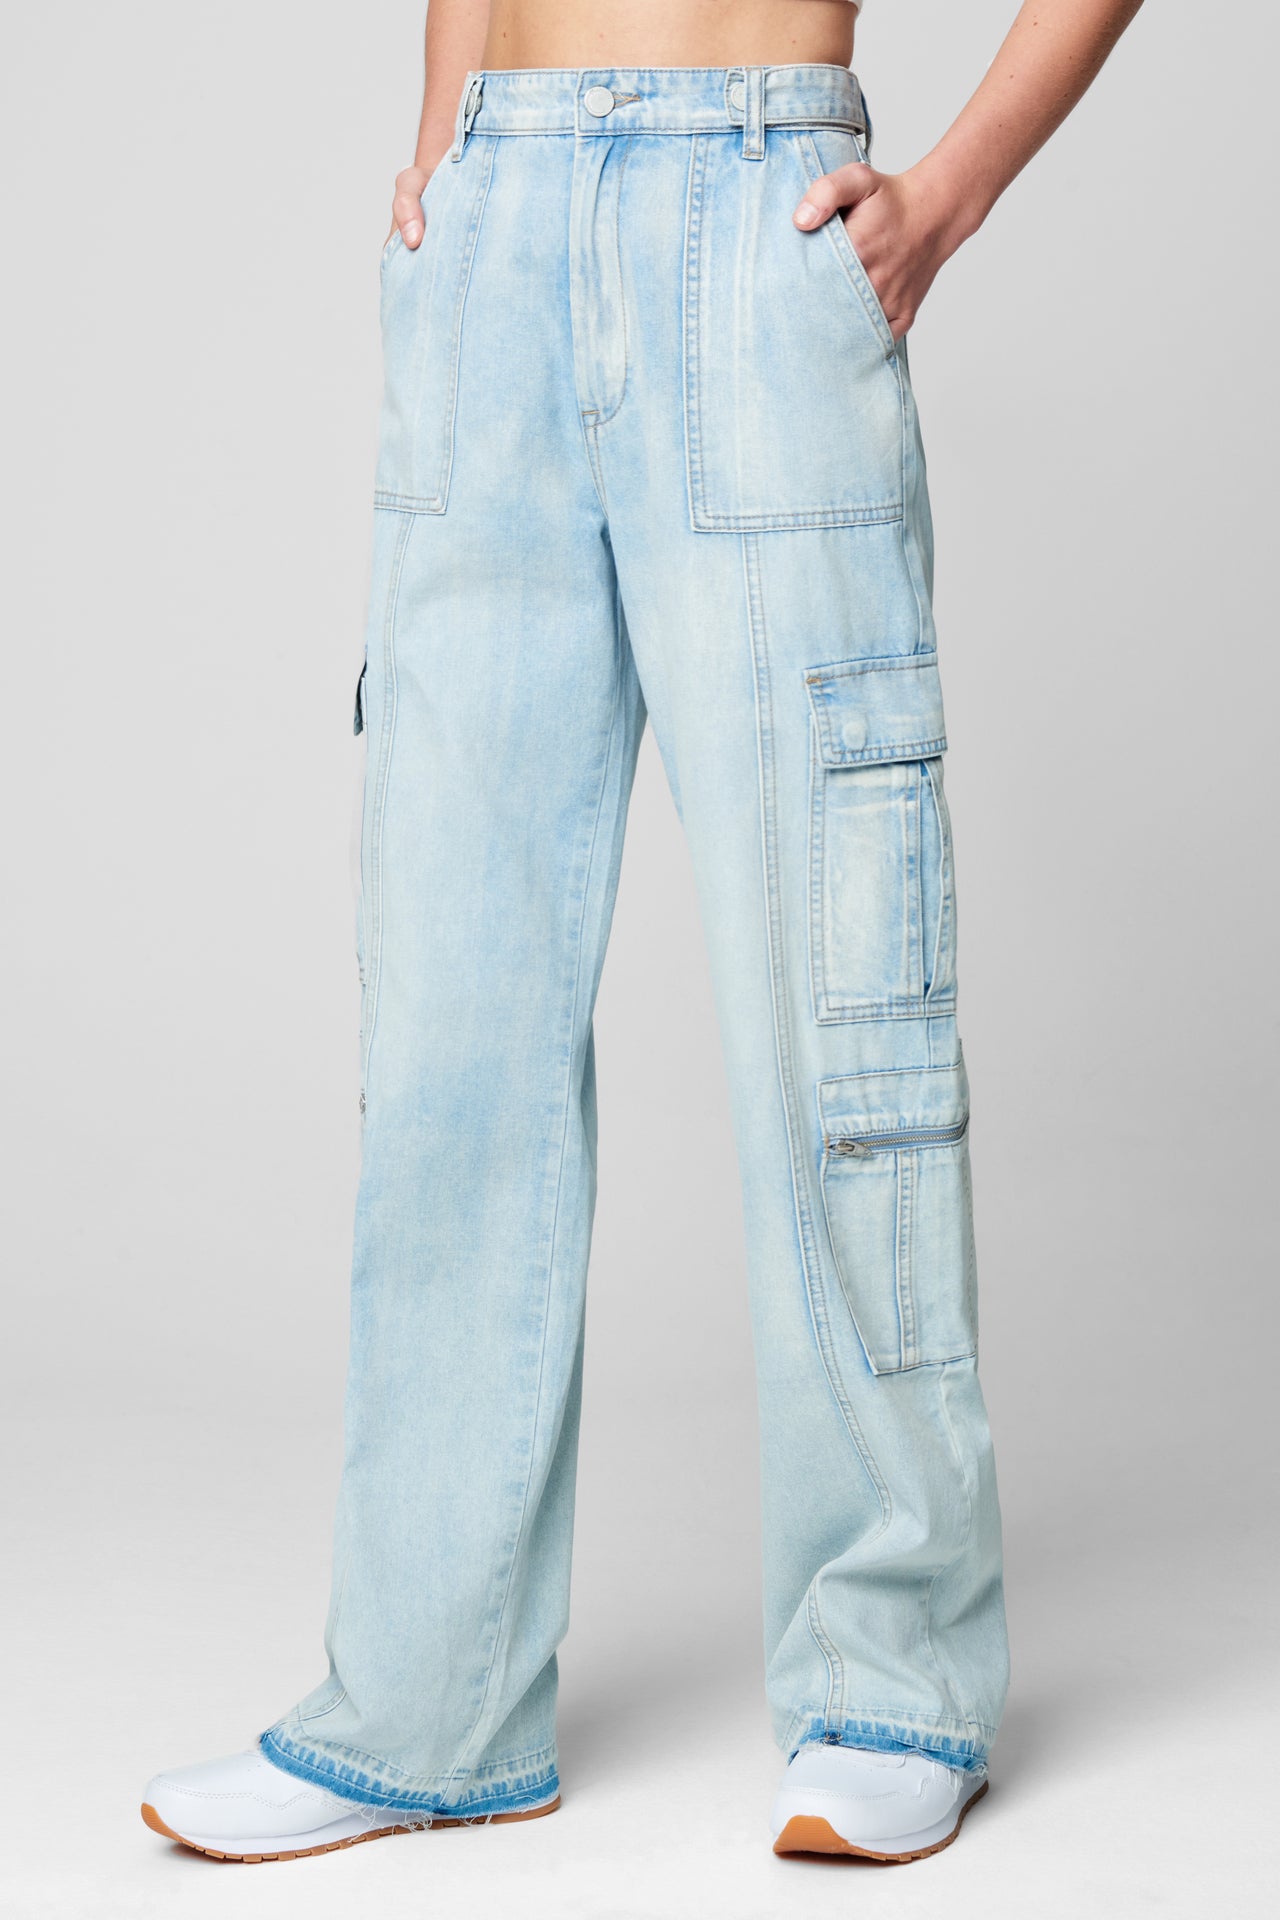 Call My Name Cargo Boutique LIT | Pants Blue